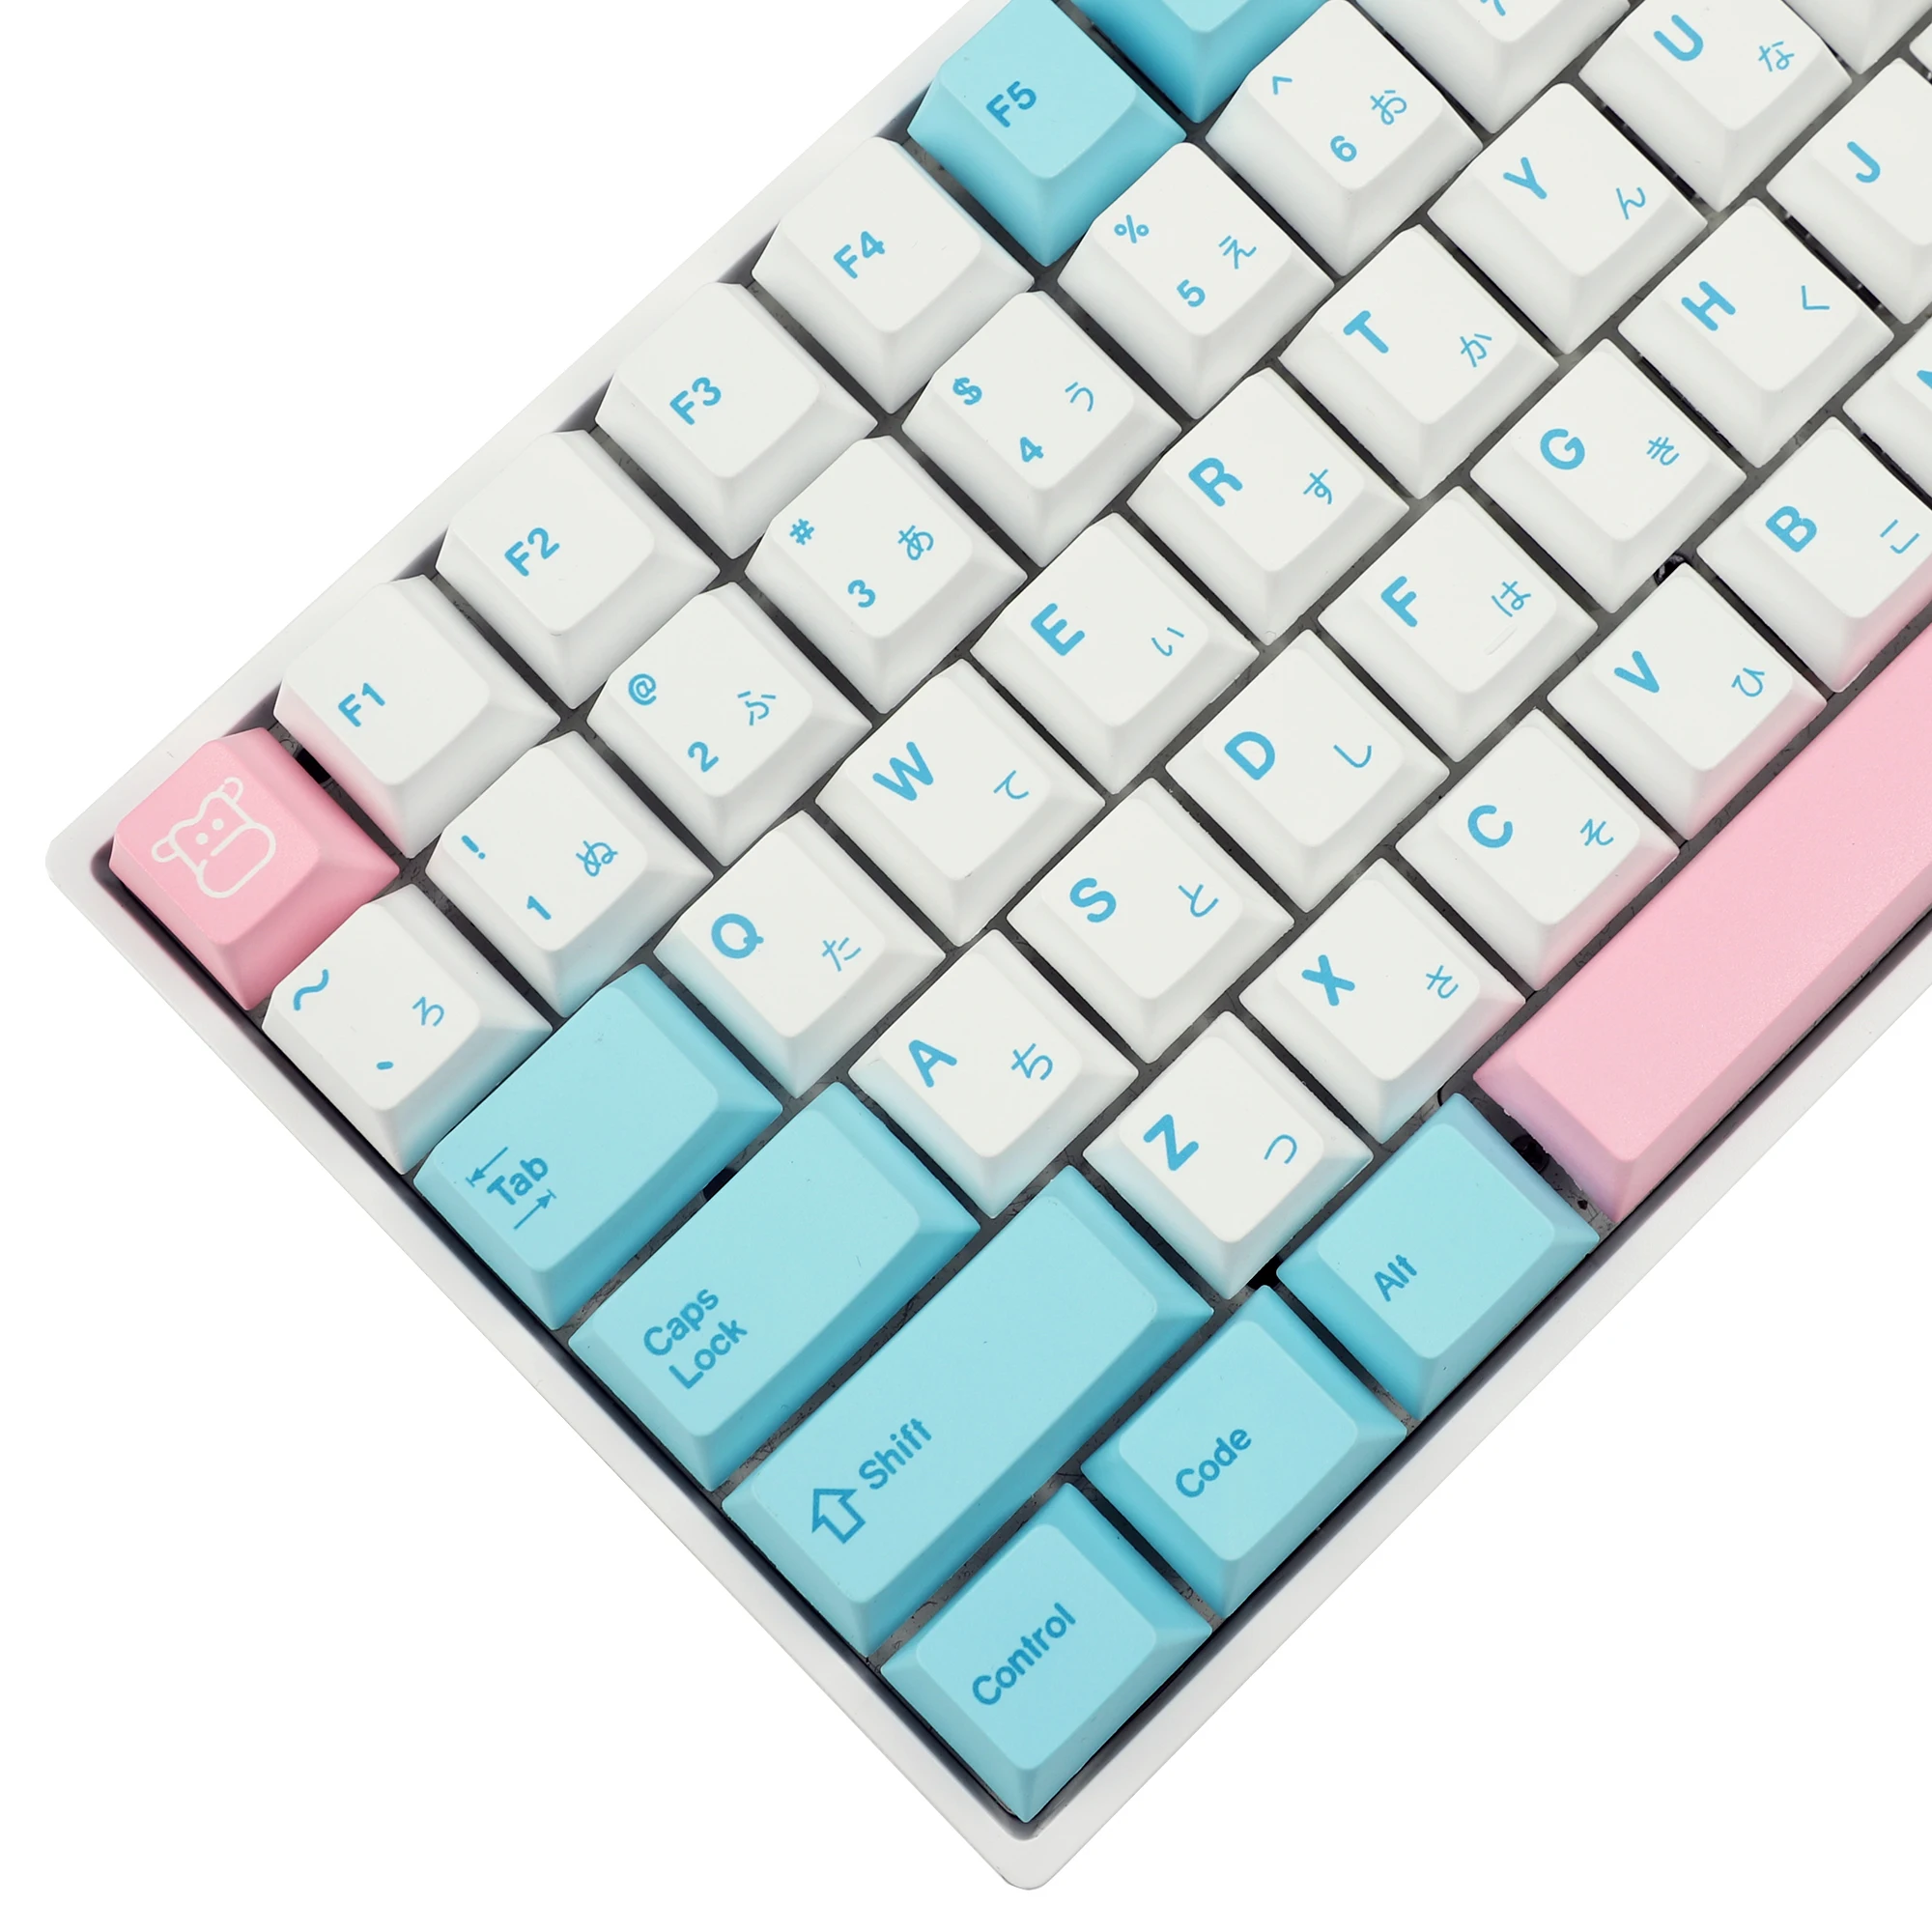 Milk cover Keycaps Cherry Profile 140 Keys Dye Sub Thick PBT For MX Switches Mechanical Keyboard 96 84 104 87 61 64 68